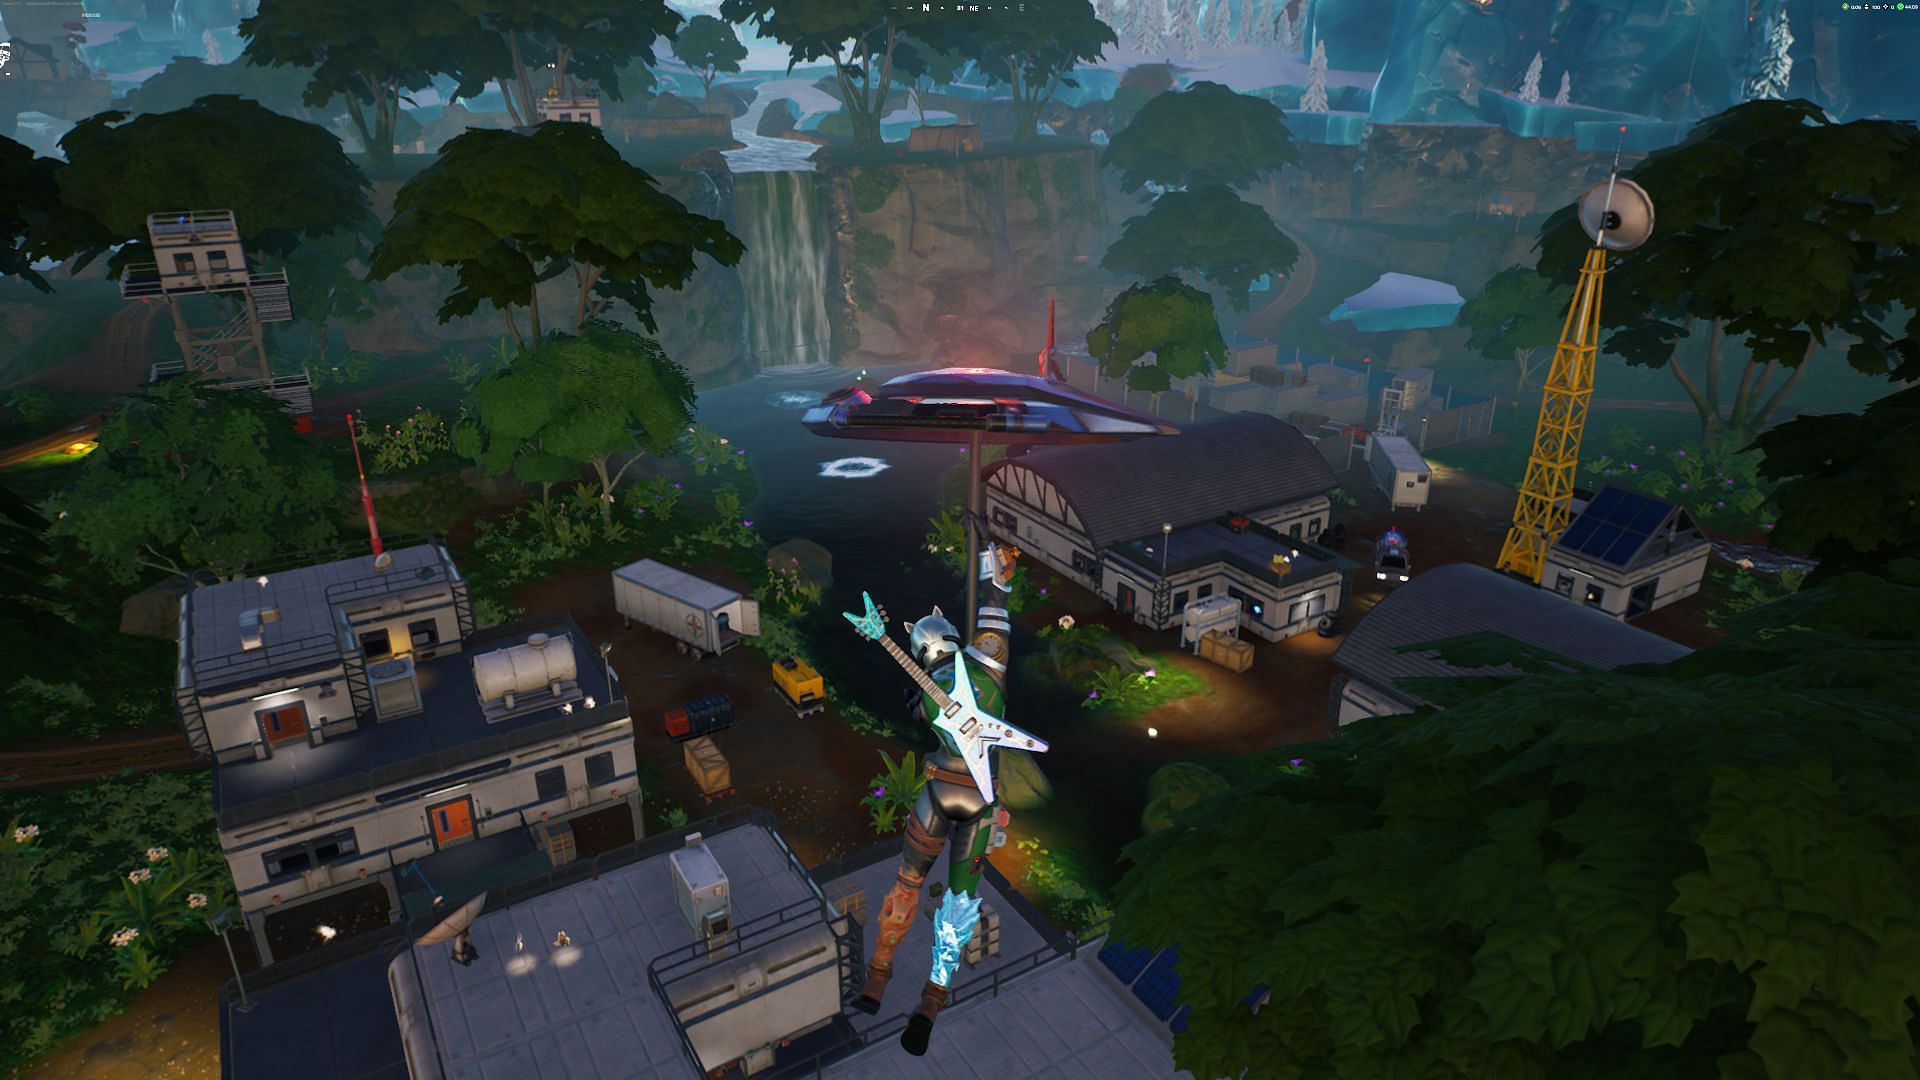 Land at the edge of the Jungle Biome to avoid confrontation (Image via Epic Games/Fortnite)